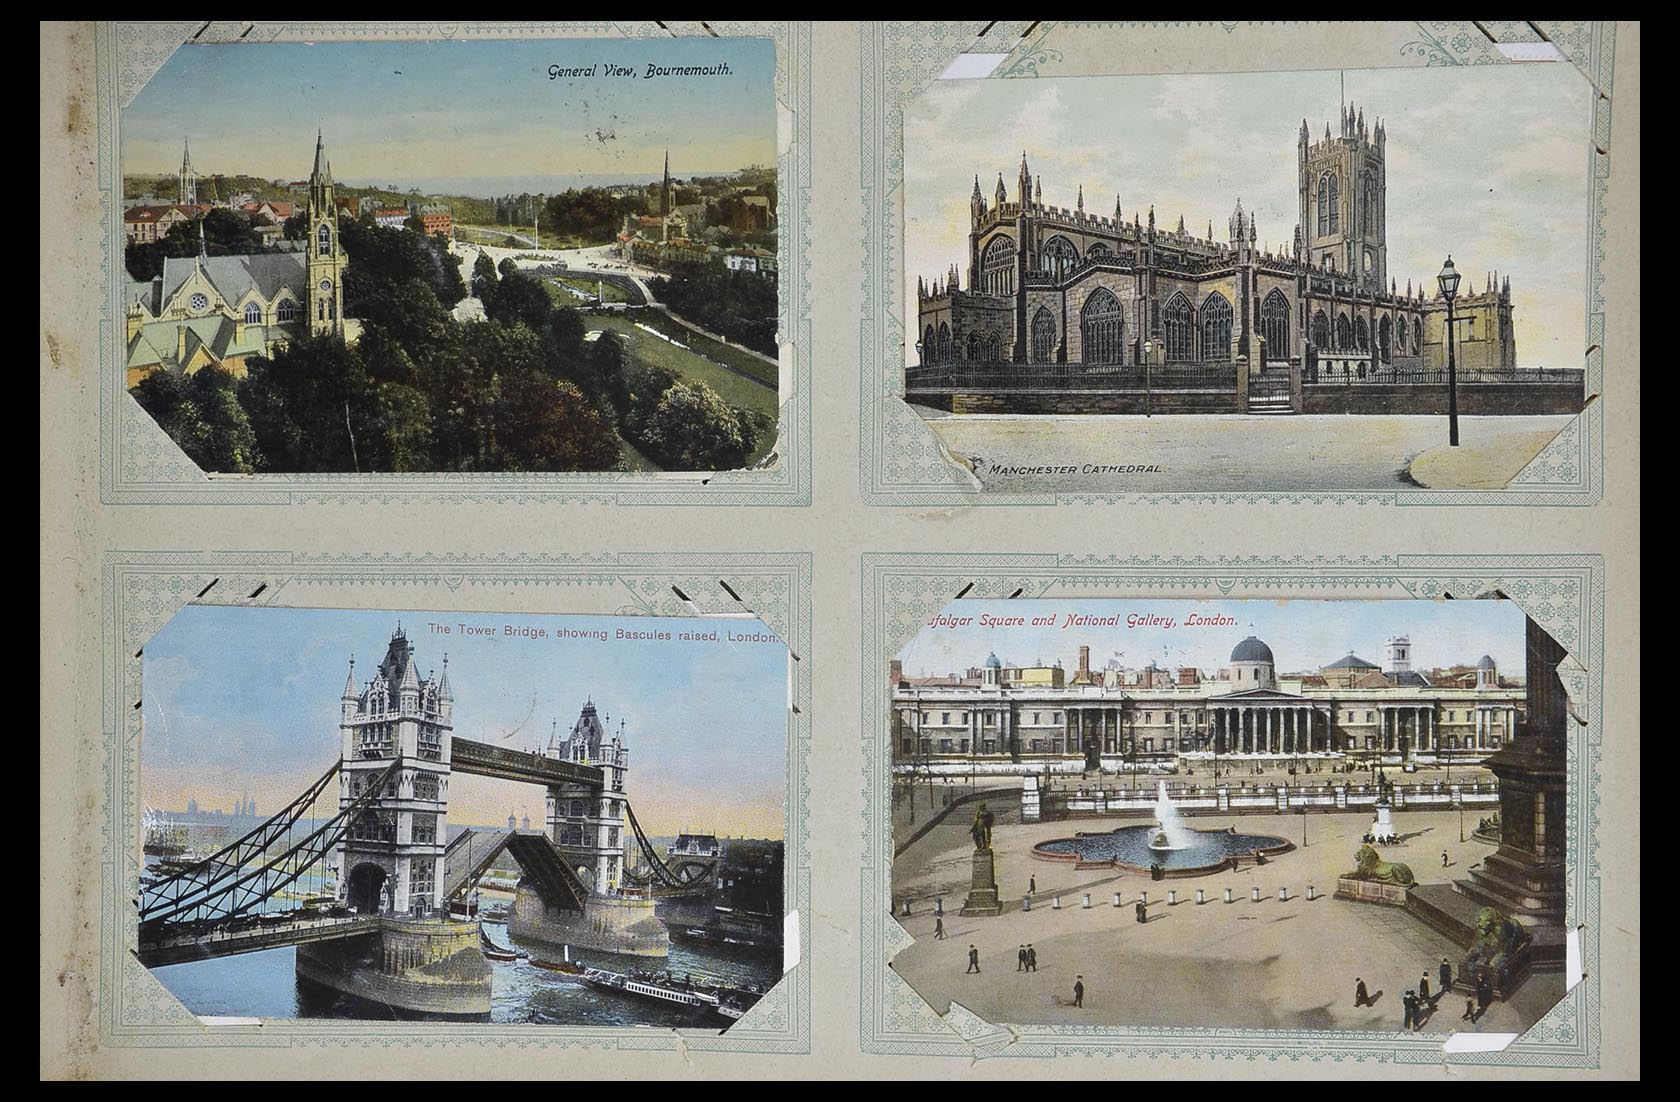 33633 067 - Stamp collection 33633 Great Britain picture postcards 1900-1950.